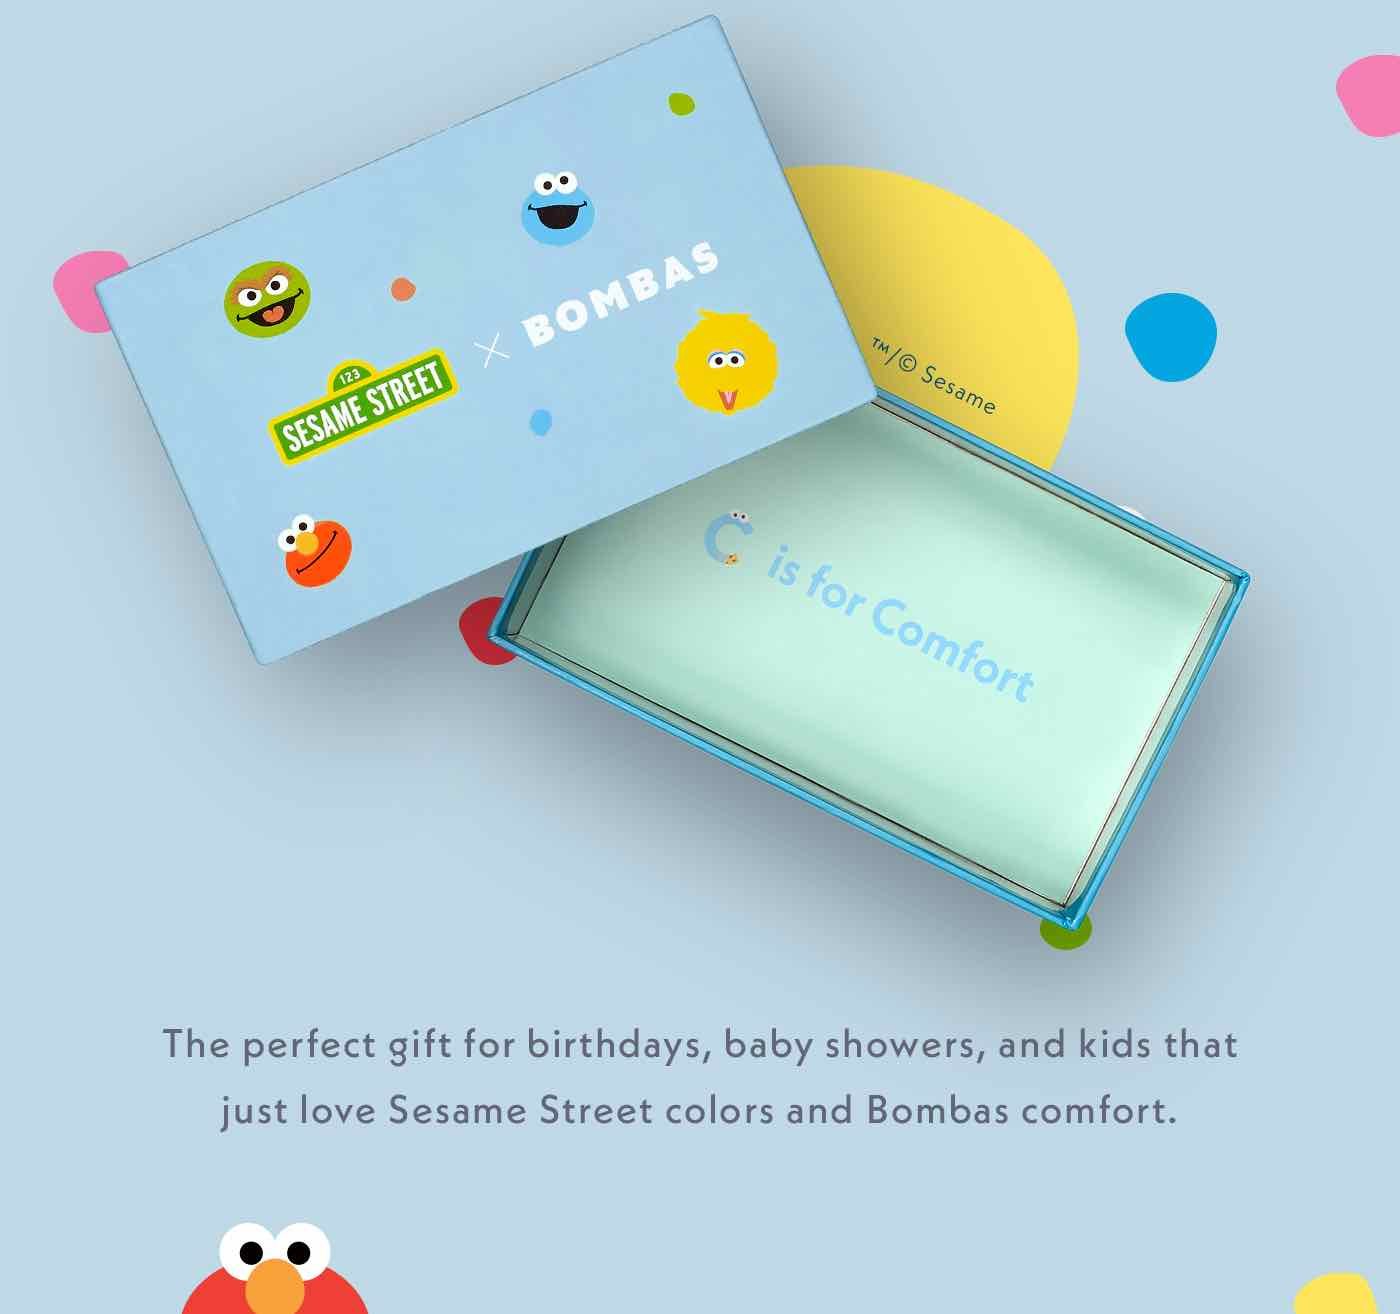 The perfect gift for birthdays, baby showers, and kids that just love Sesame Street colors and Bombas comfort.